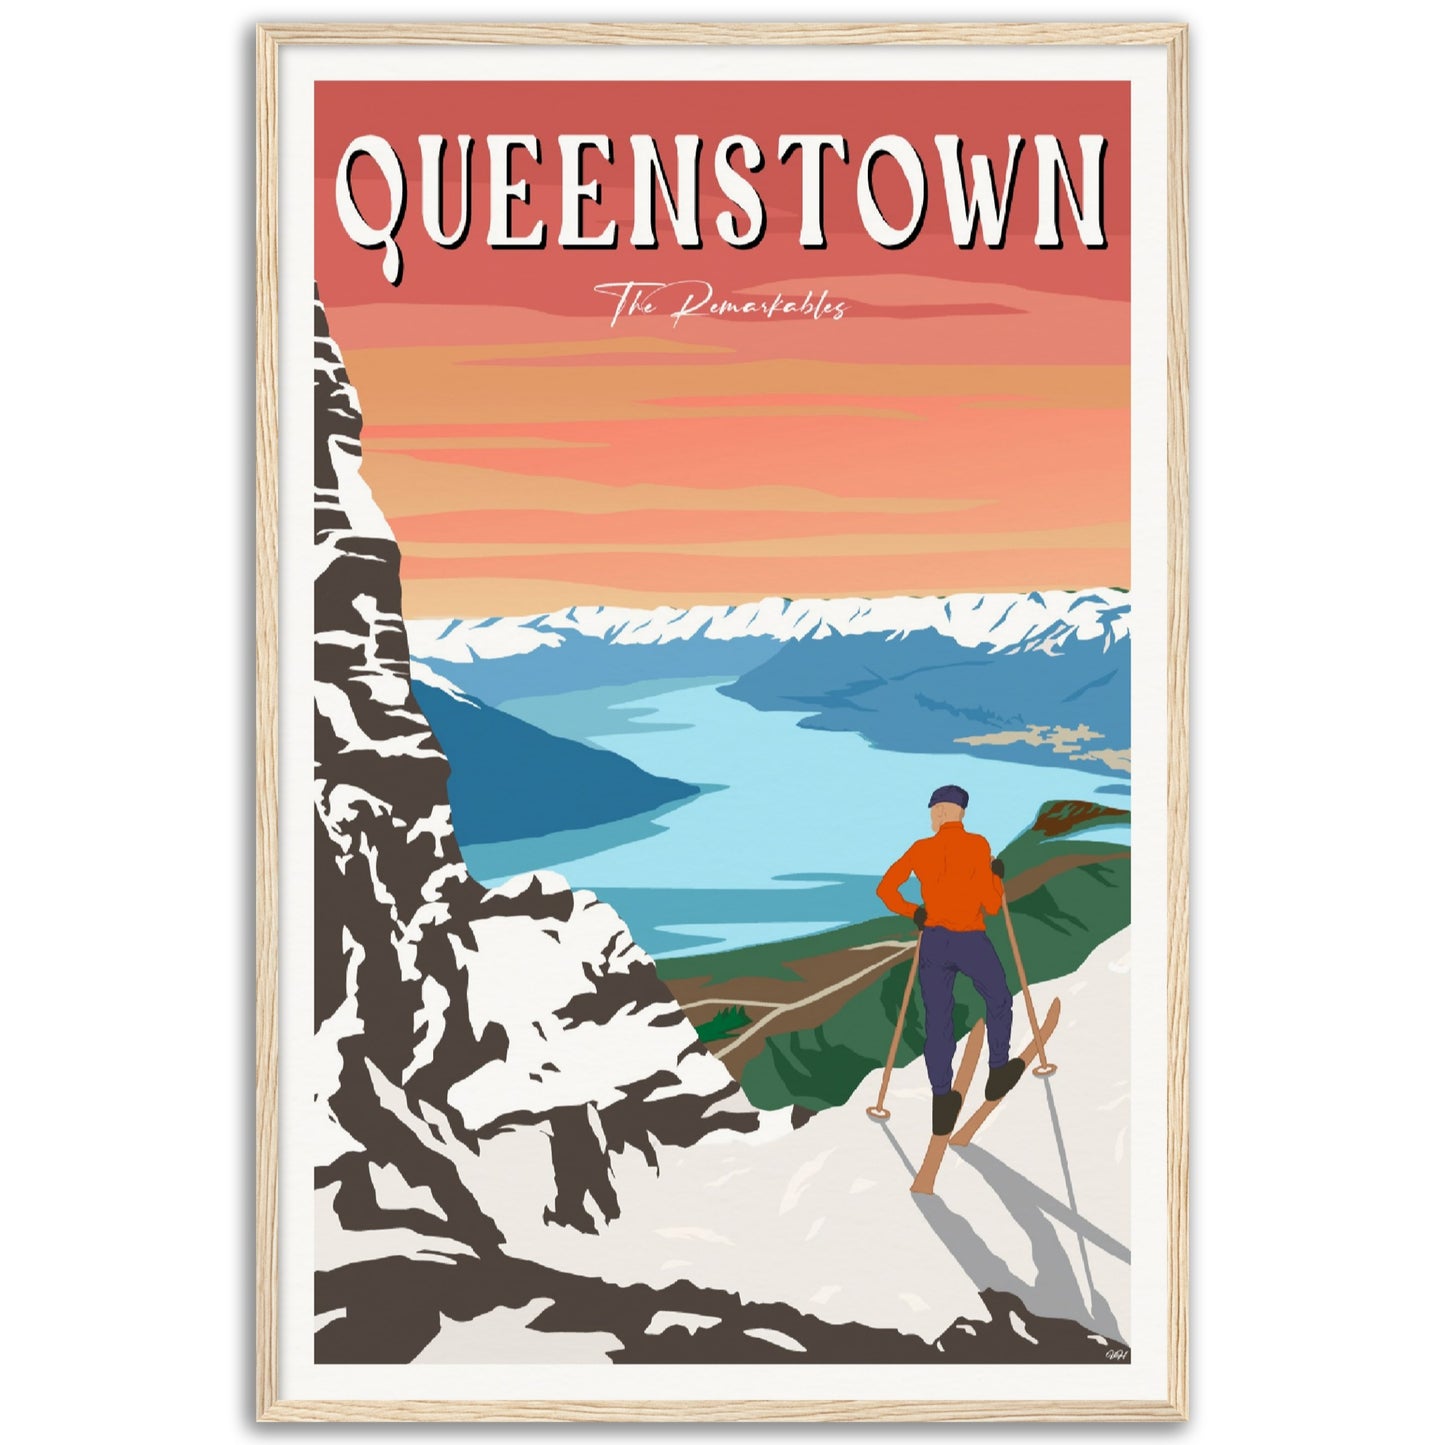 Queenstown - The Remarkables - Travel Poster, New Zealand